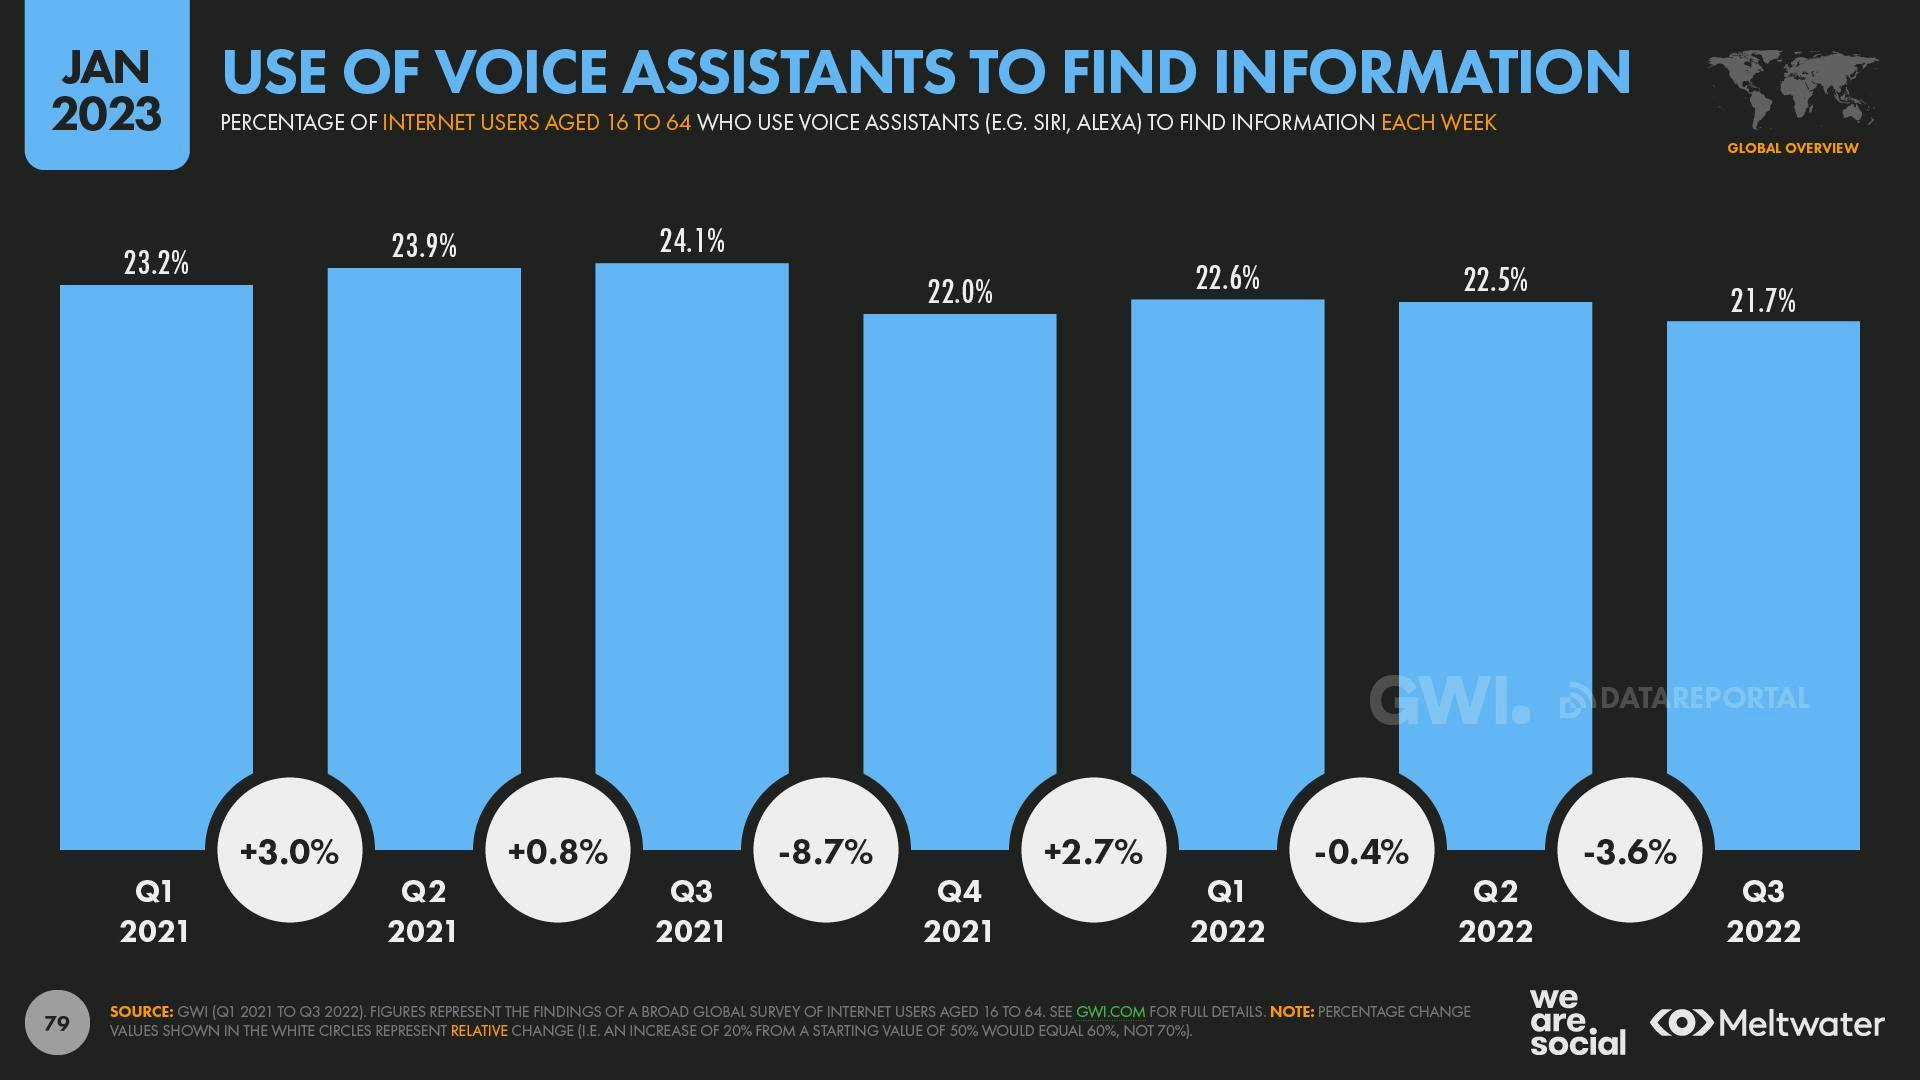 Use of voice assistants to find information 2021 - 2022